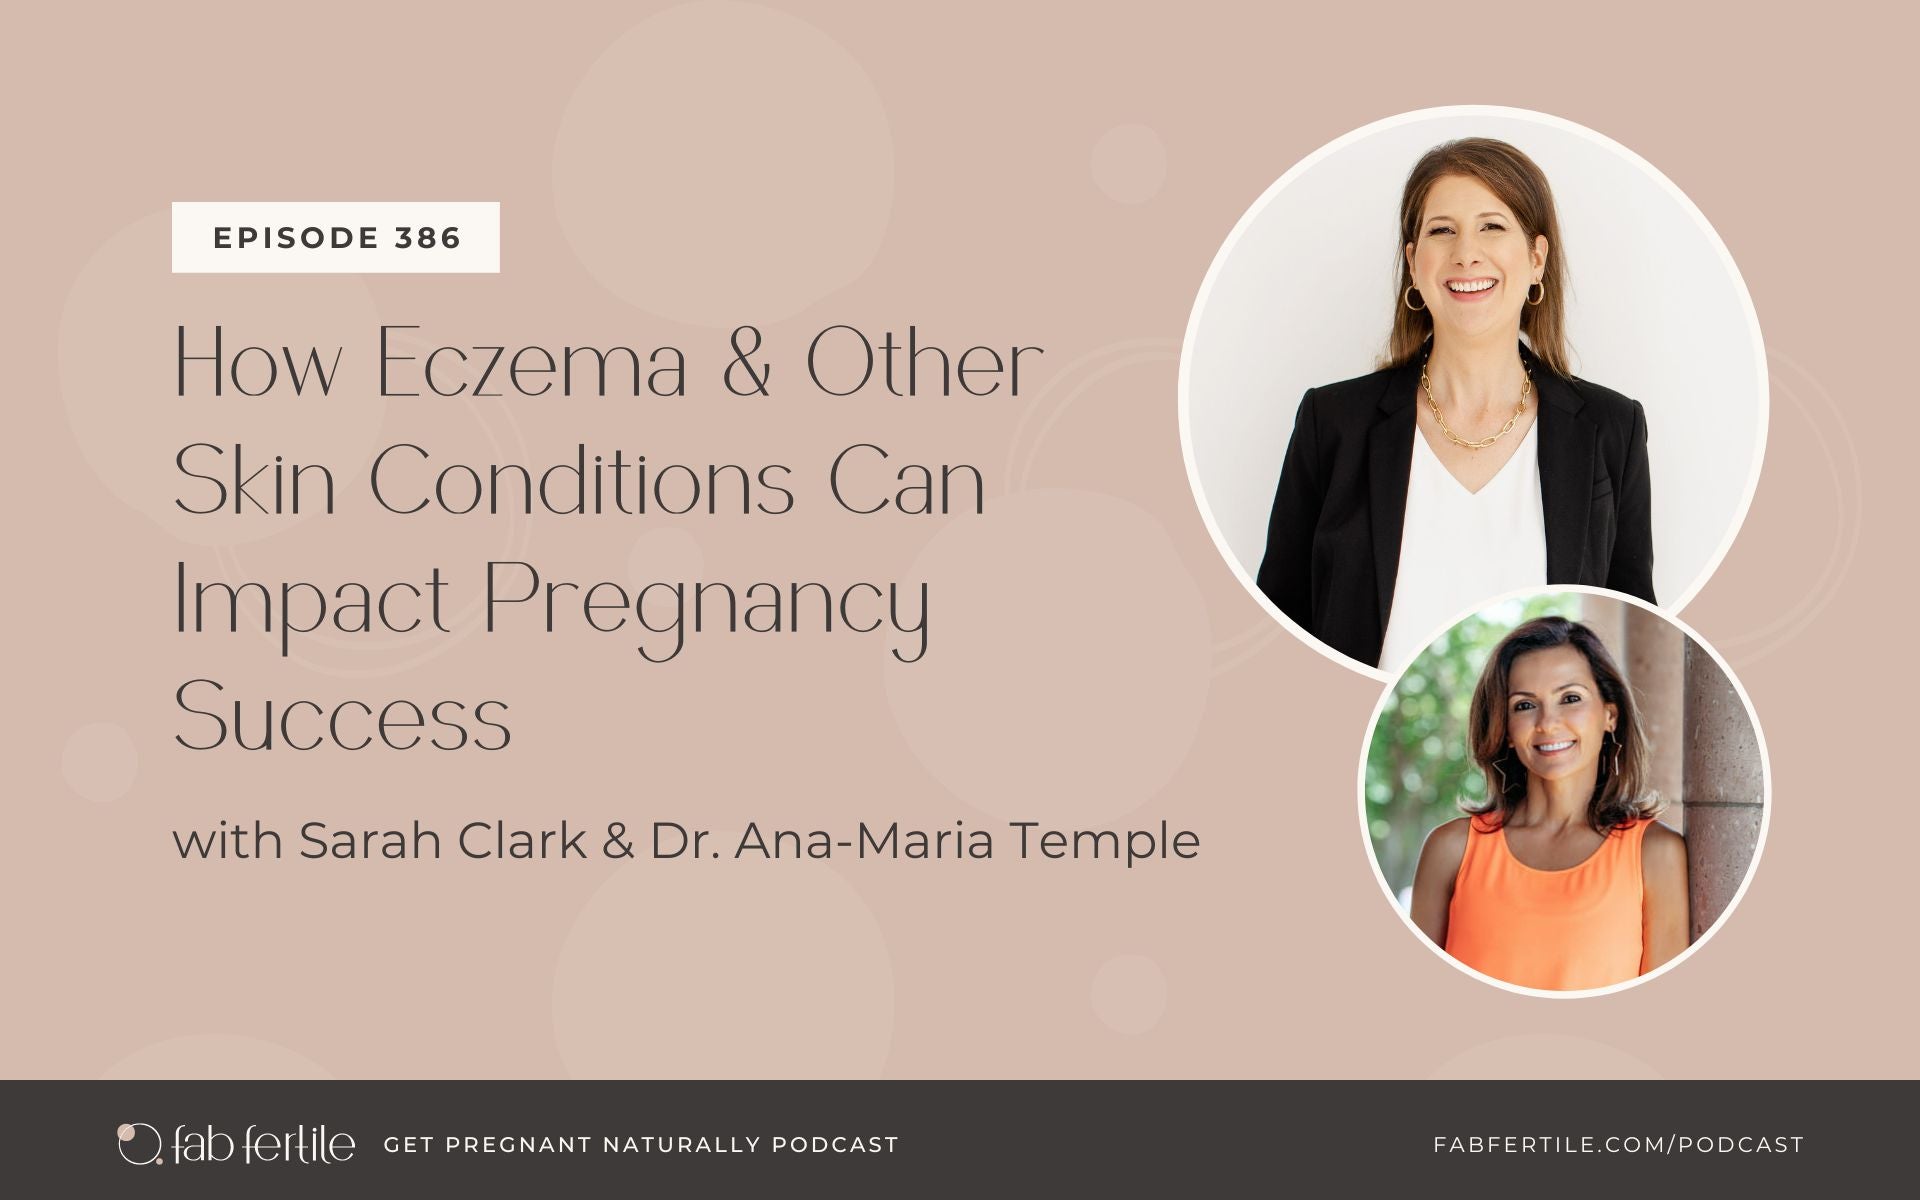 How Eczema & Other Skin Conditions Can Impact Pregnancy Success